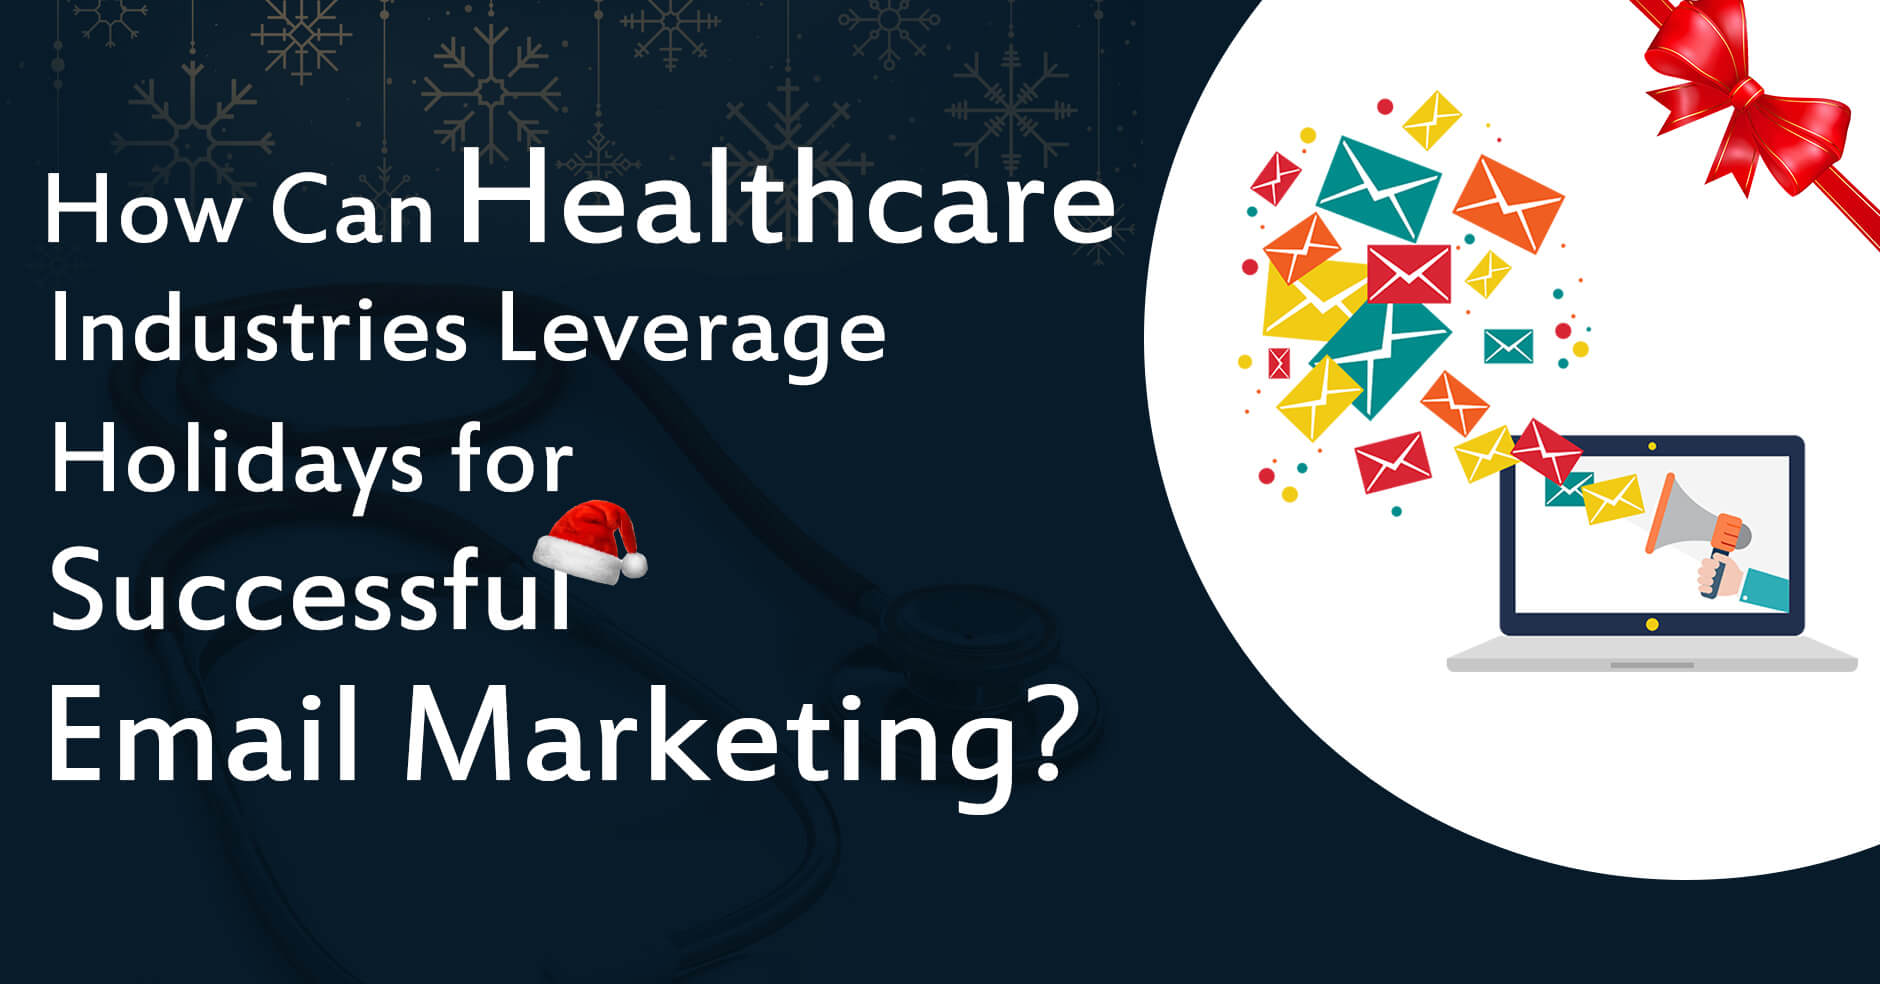 Healthcare Industries Leverage email marketing